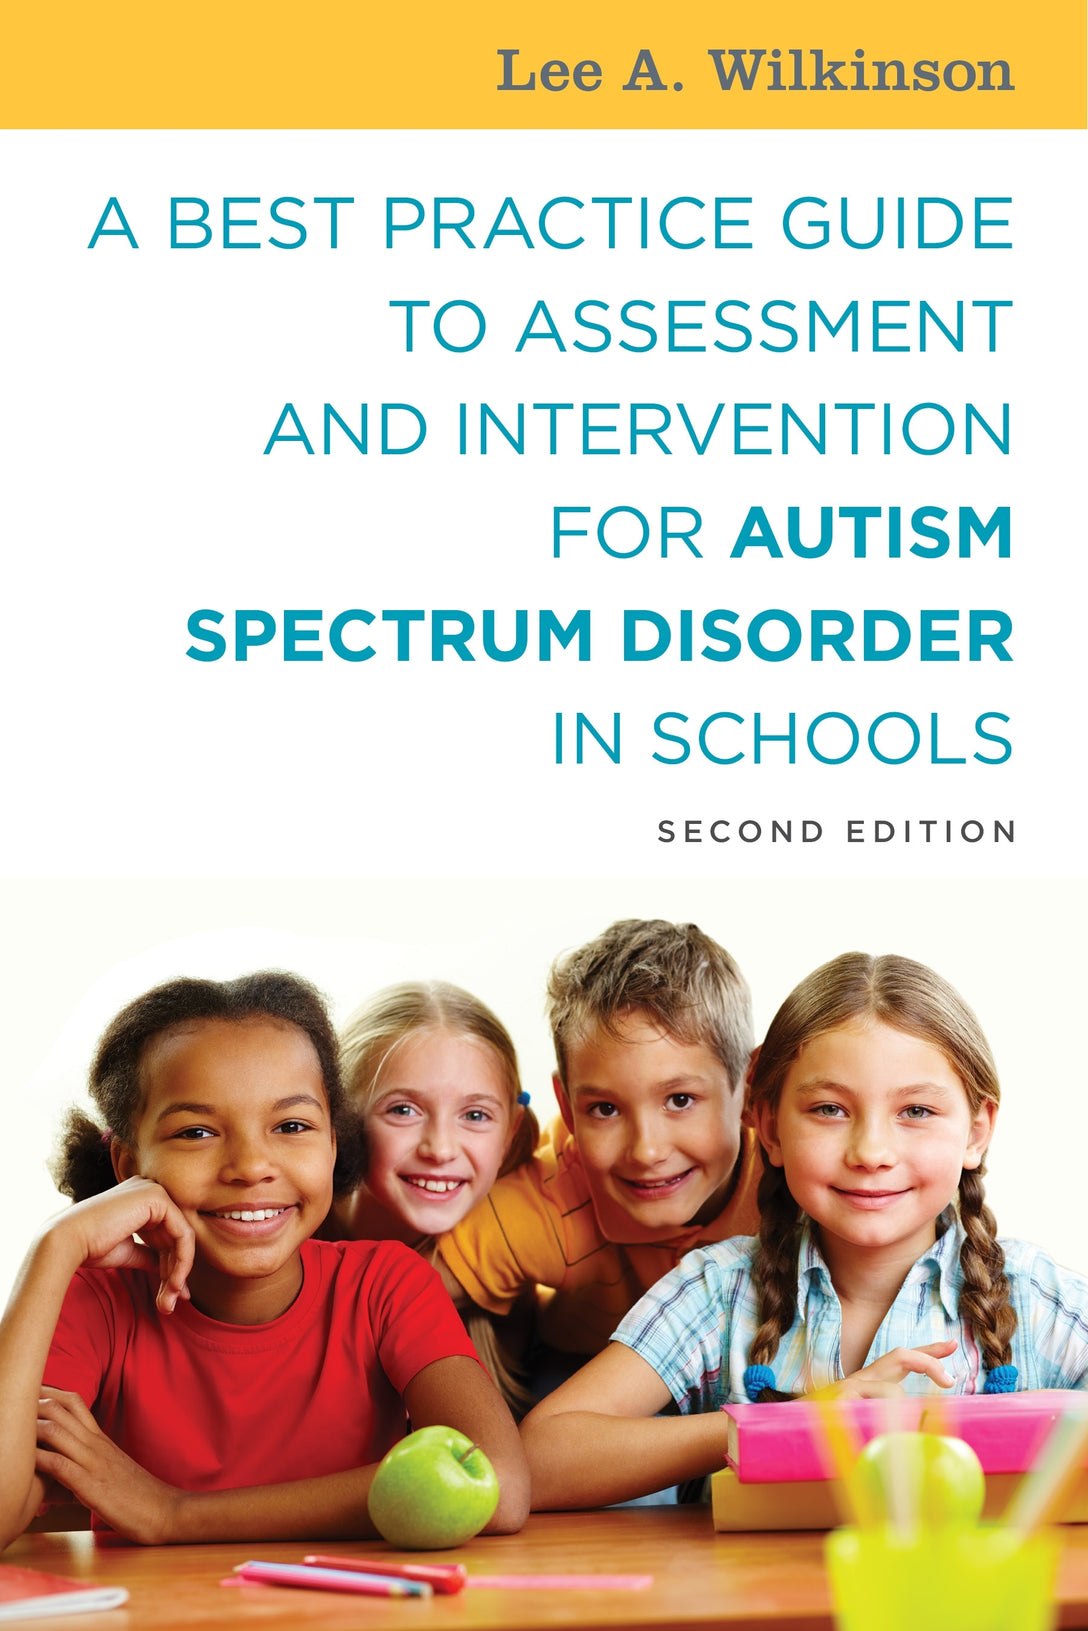 A Best Practice Guide to Assessment and Intervention for Autism Spectrum Disorder in Schools, Second Edition by Lee A. Wilkinson